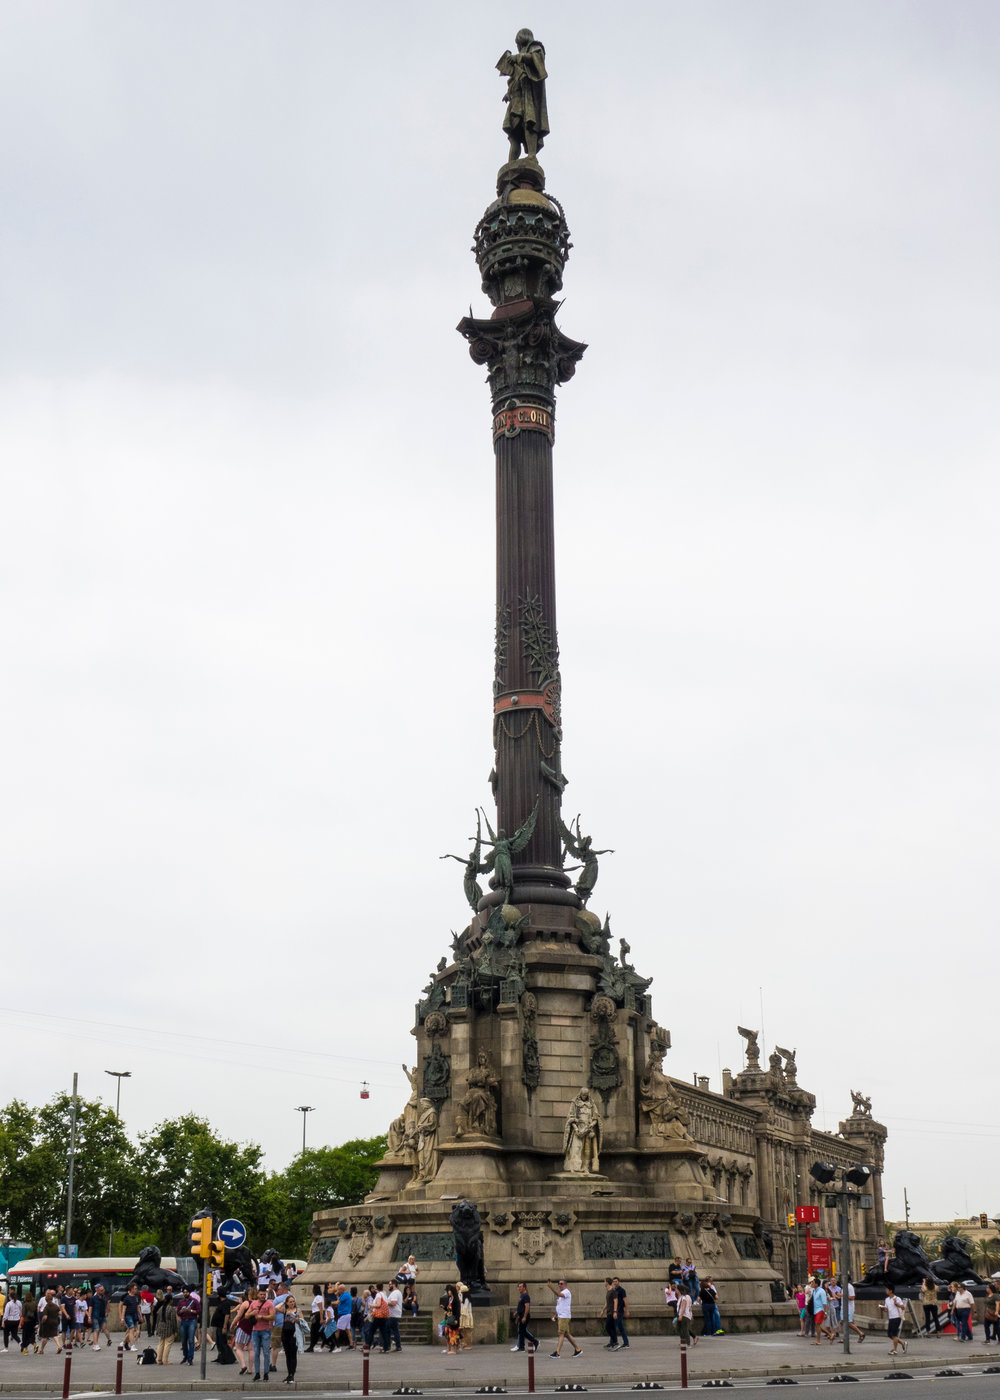  The Columbus Monument, a 60 m (197 ft) tall monument to Christopher Columbus at the lower end of La Rambla.  